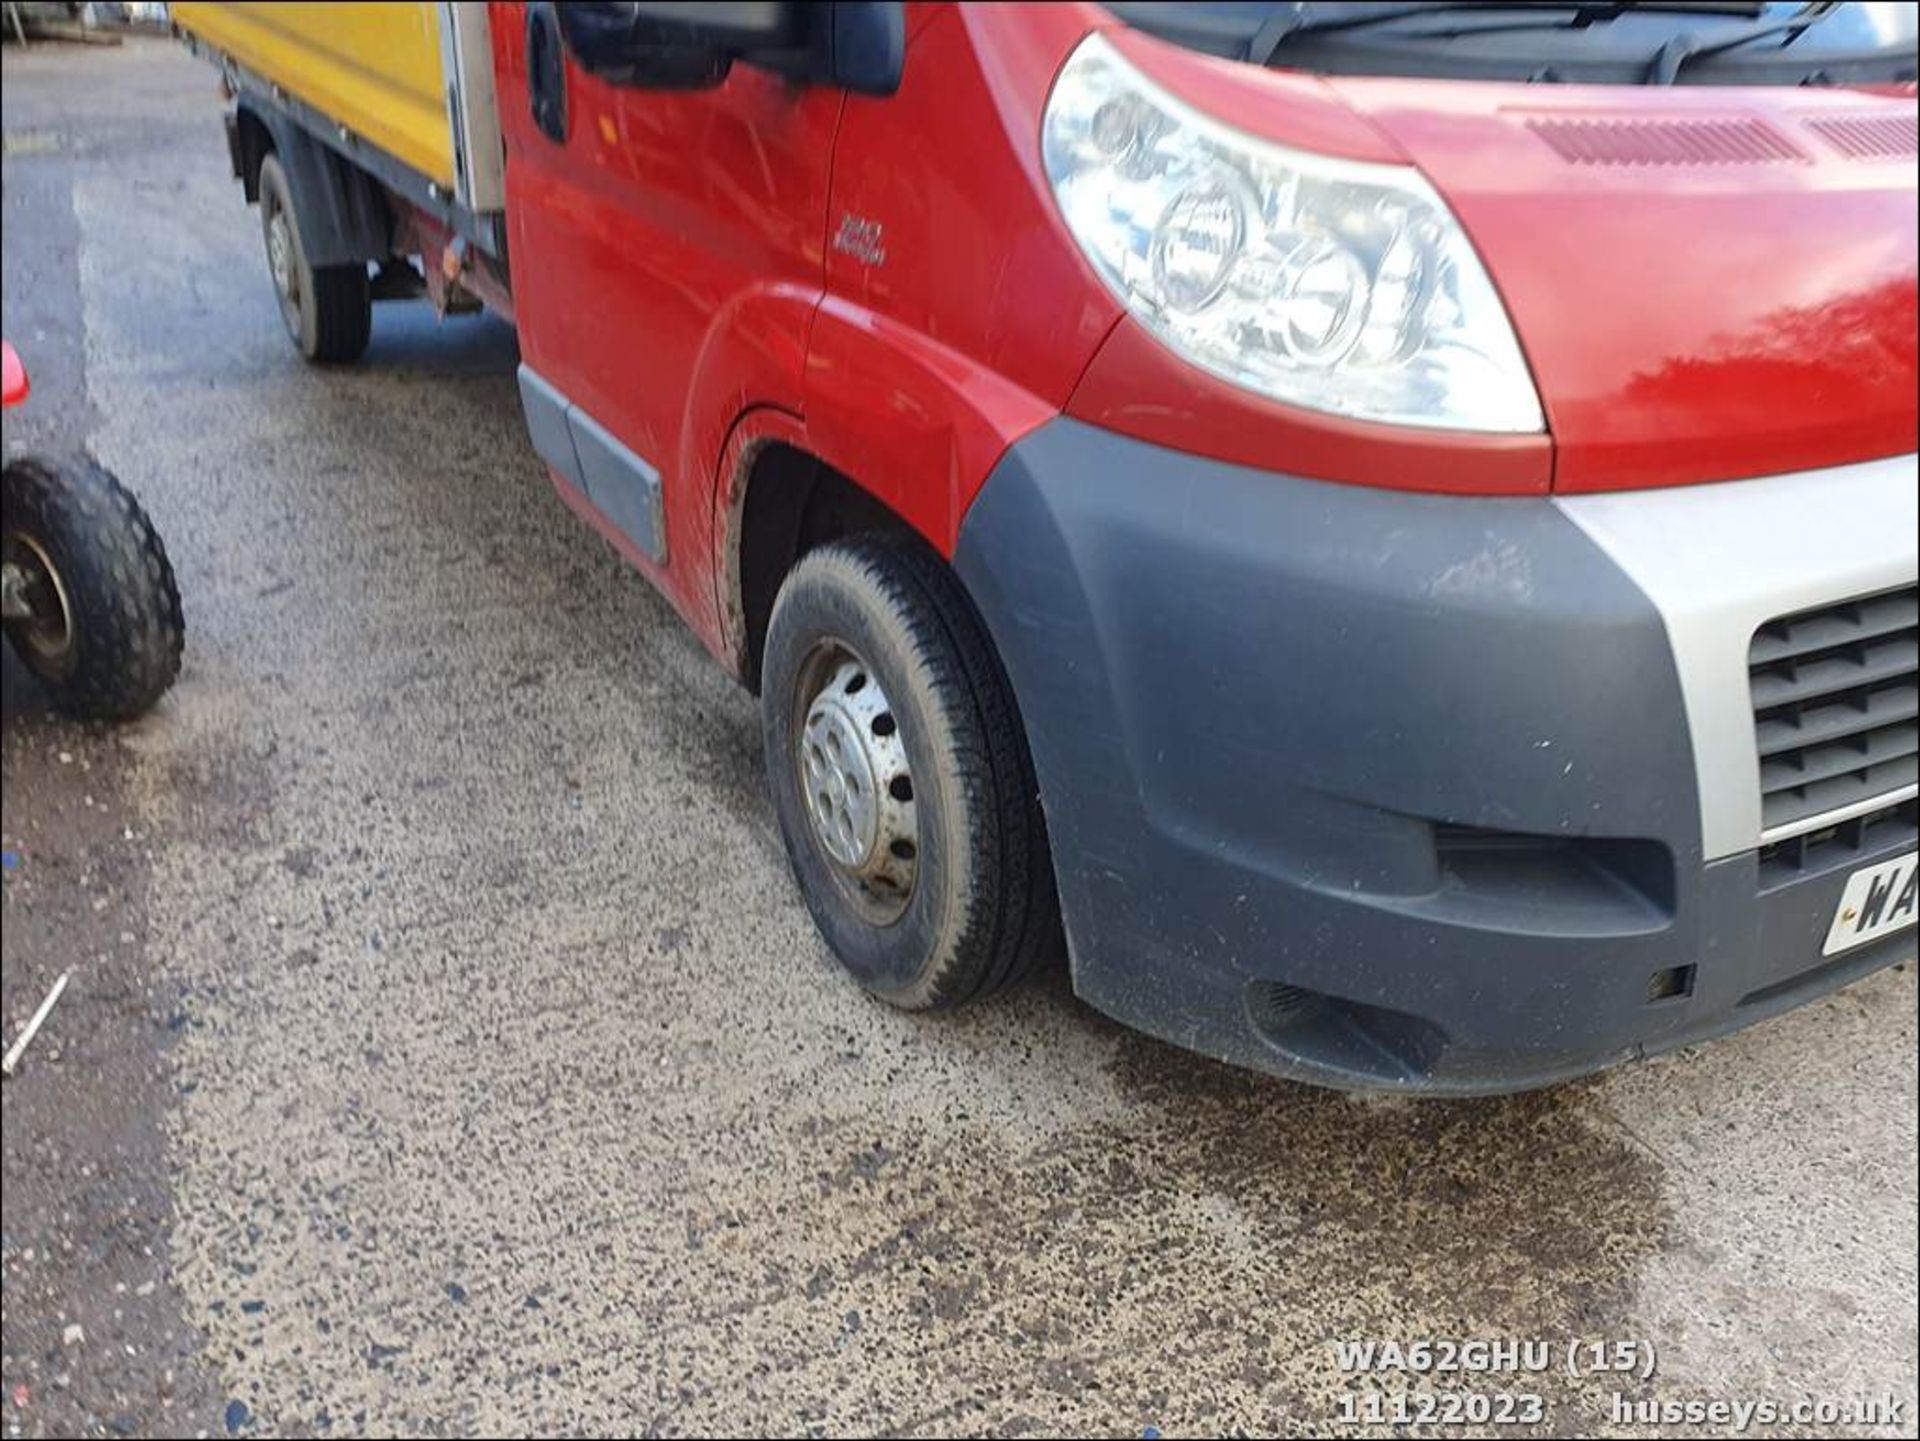 12/62 FIAT DUCATO 35 MULTIJET - 2287cc 2.dr Flat Bed (Red) - Image 16 of 45